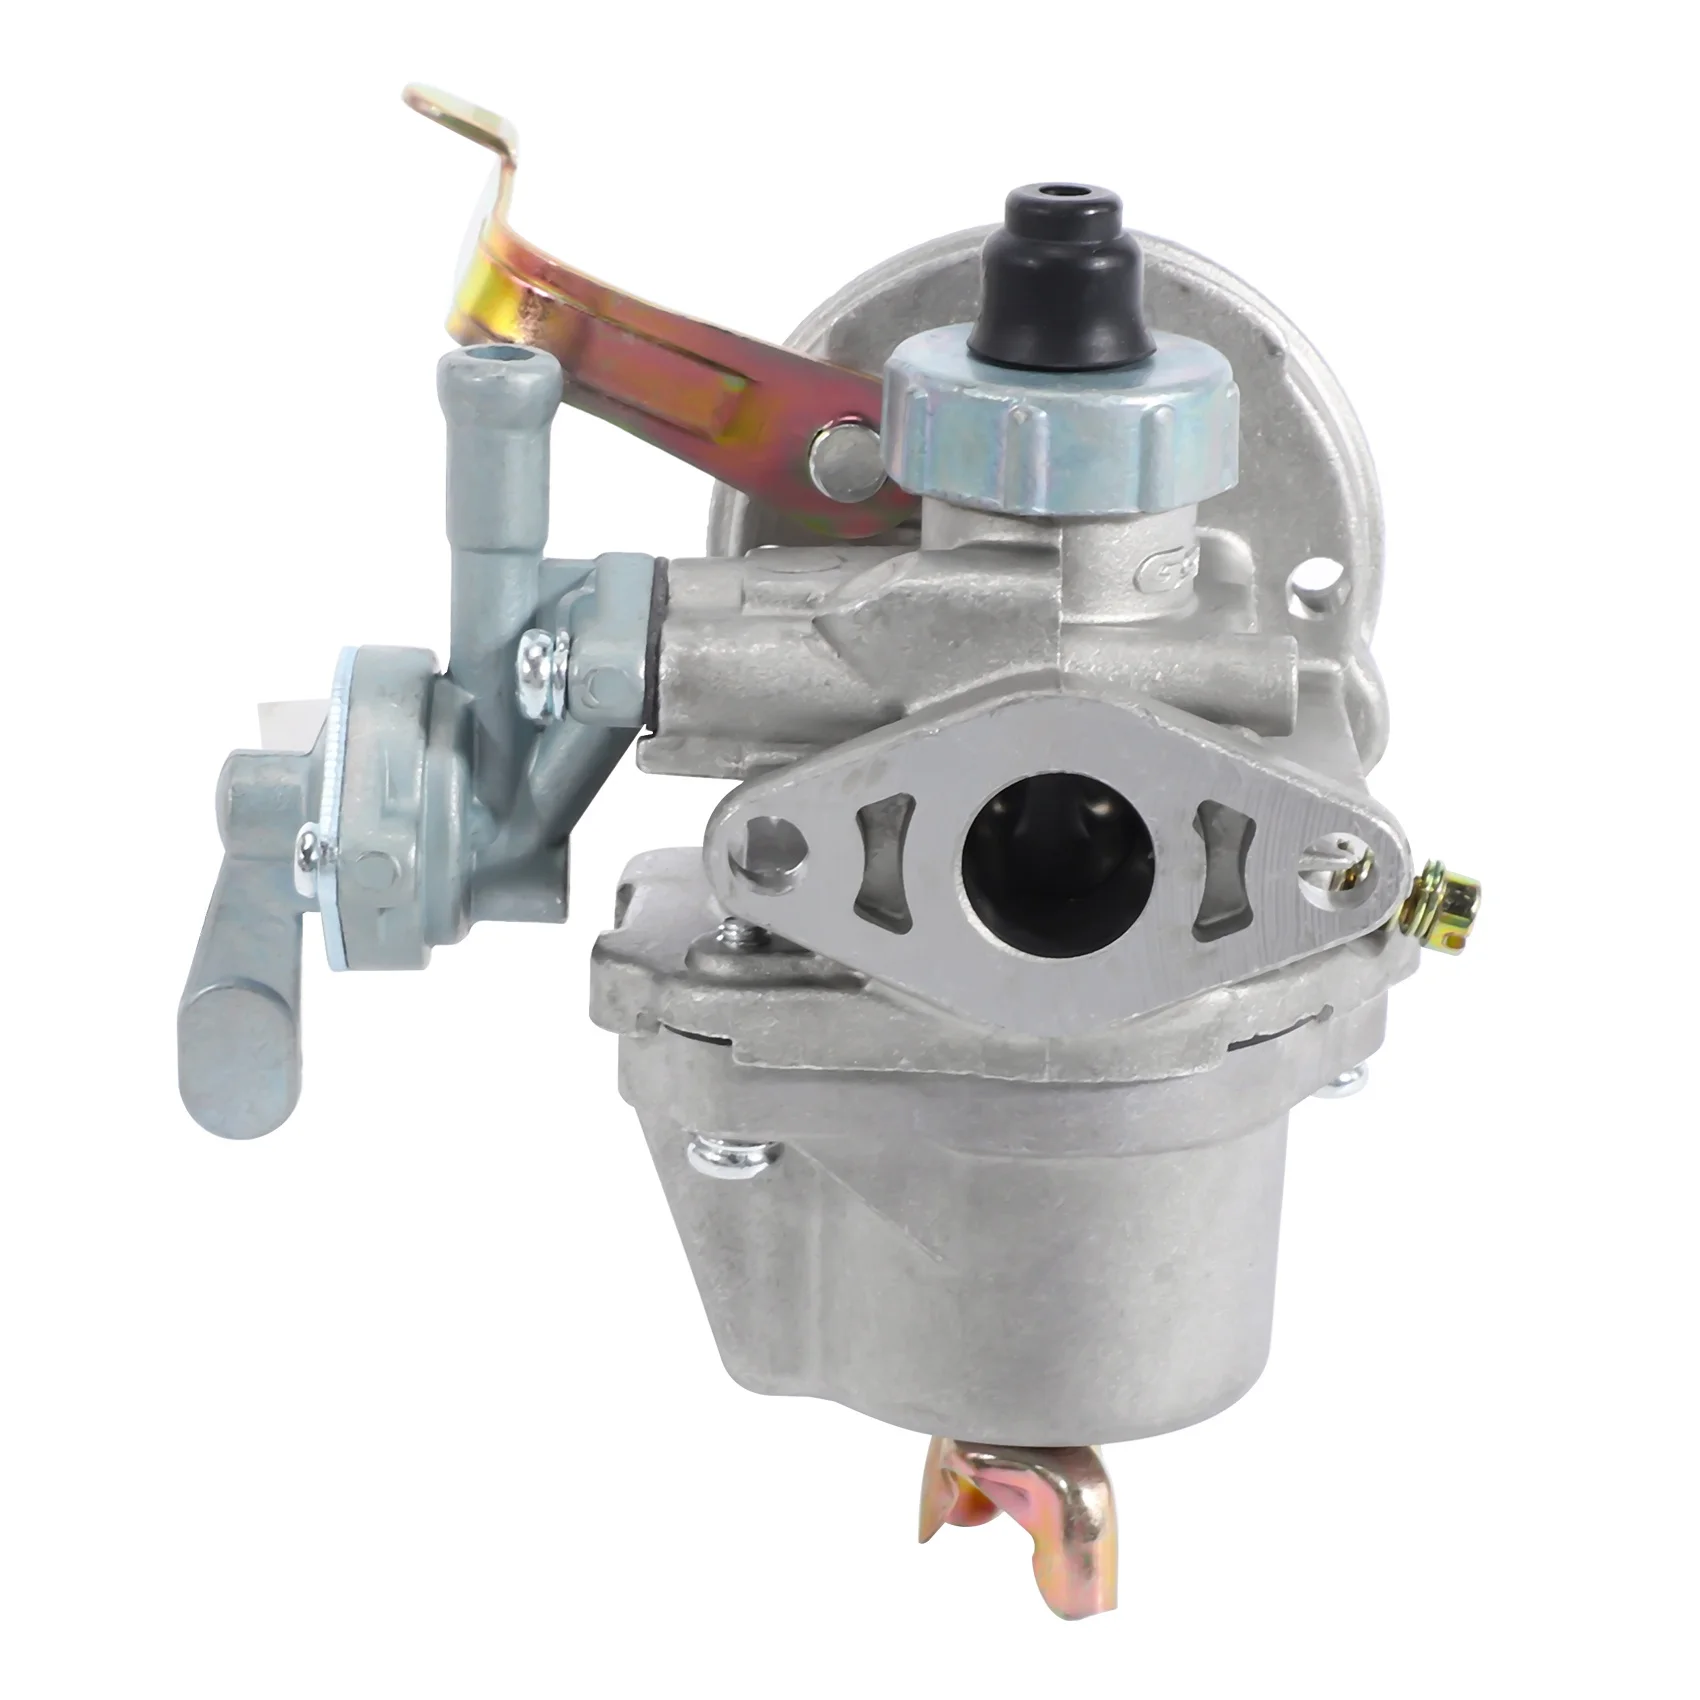 

Carburetor for Robin NB411 CG411 BG411 EC04 49CC Brush Cutter Weedeater Trimmer 5416040000 Replacement